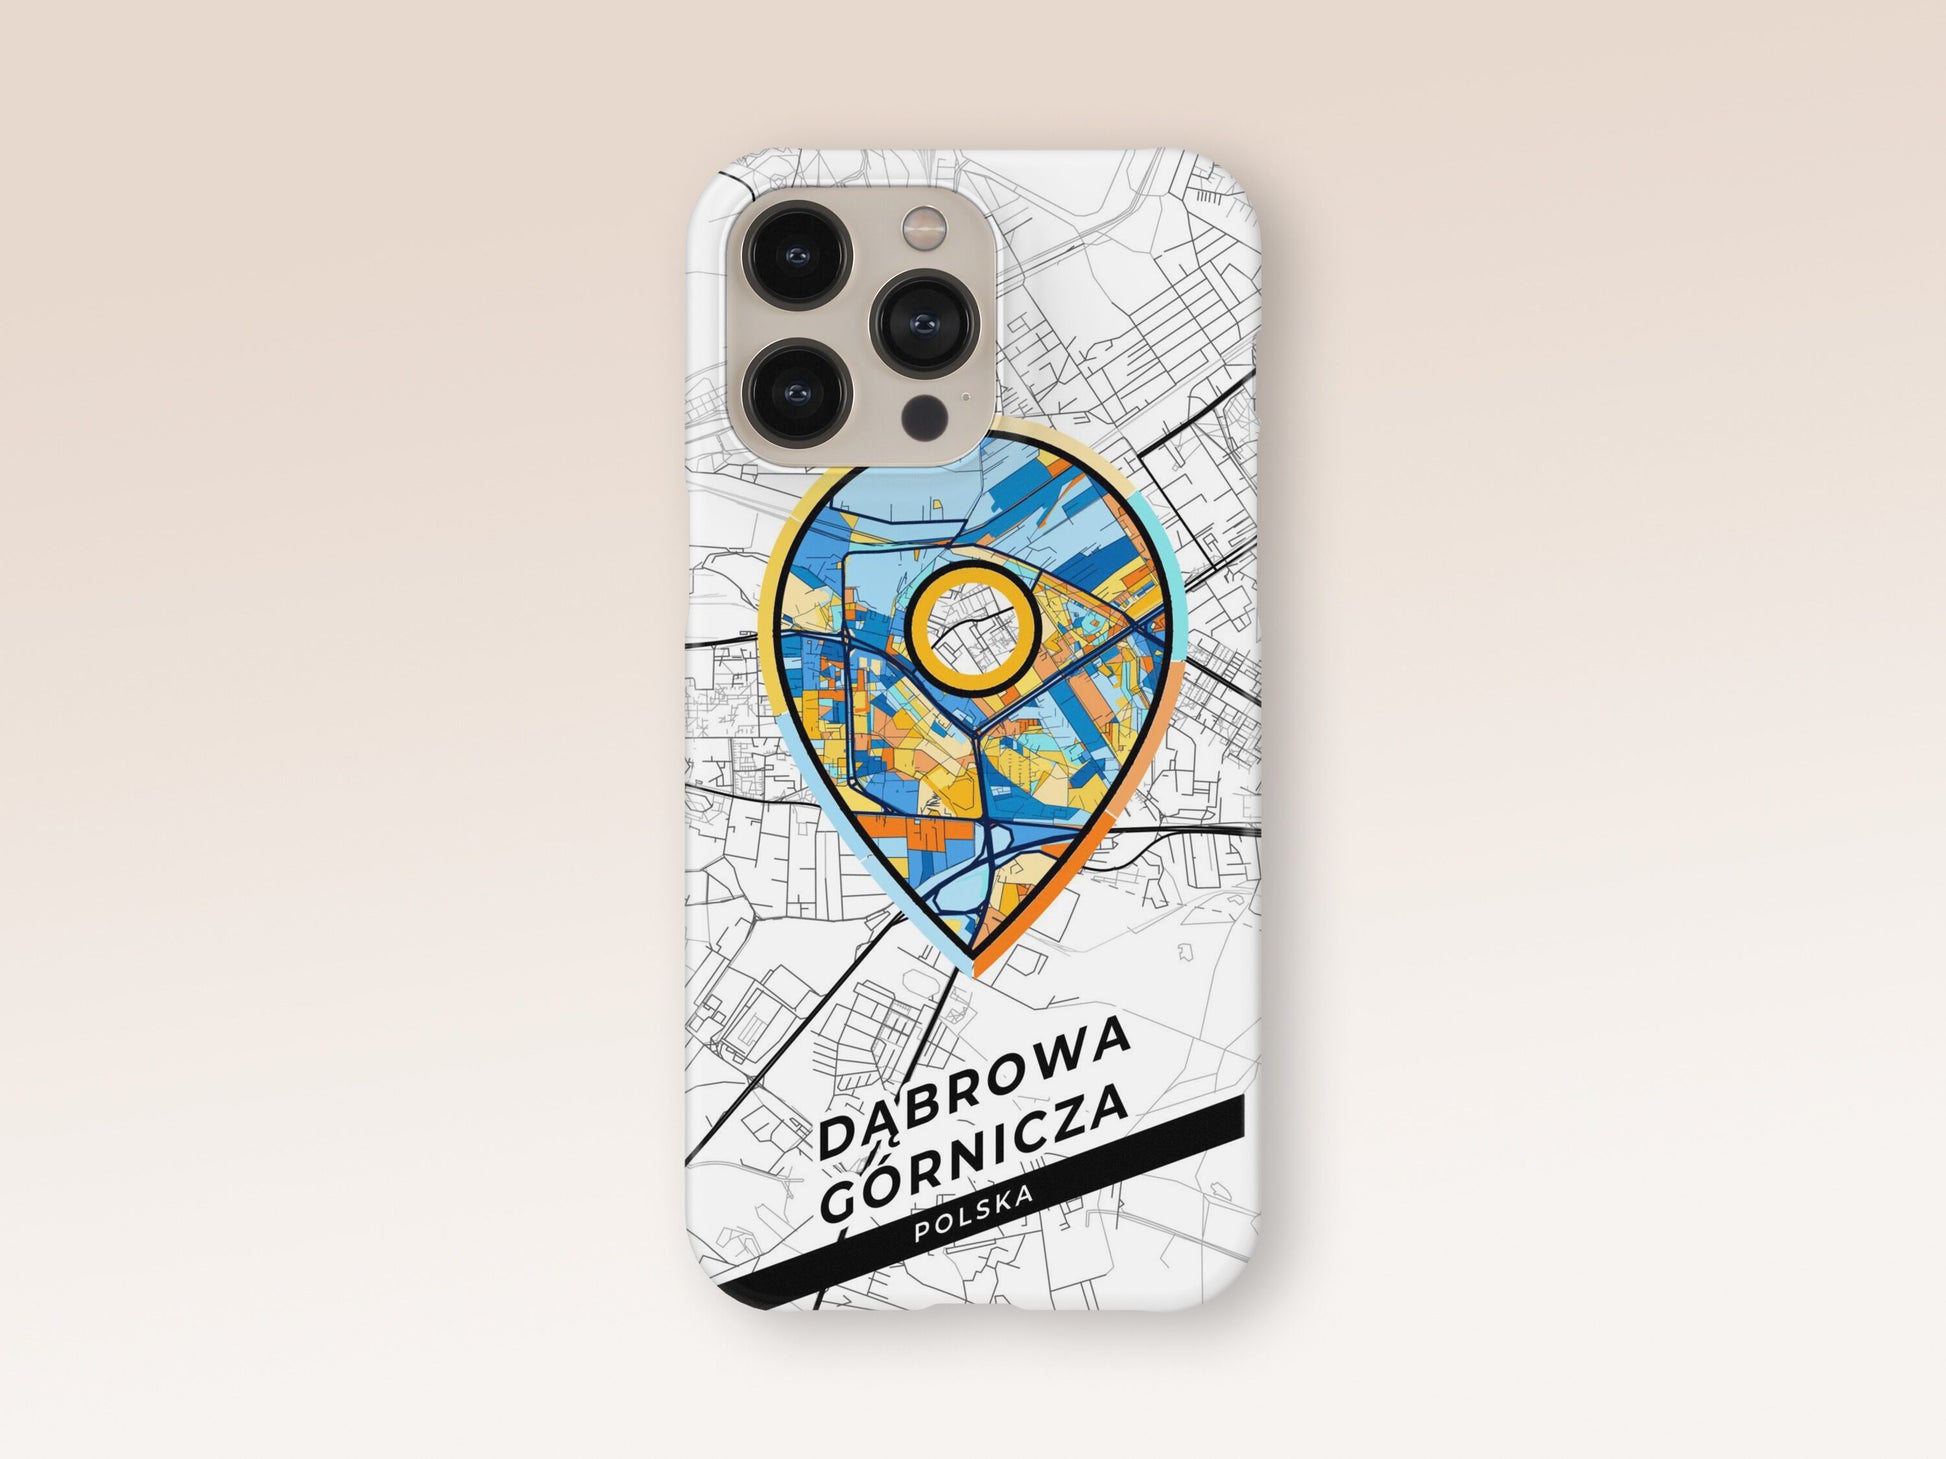 Dąbrowa Górnicza Poland slim phone case with colorful icon. Birthday, wedding or housewarming gift. Couple match cases. 1